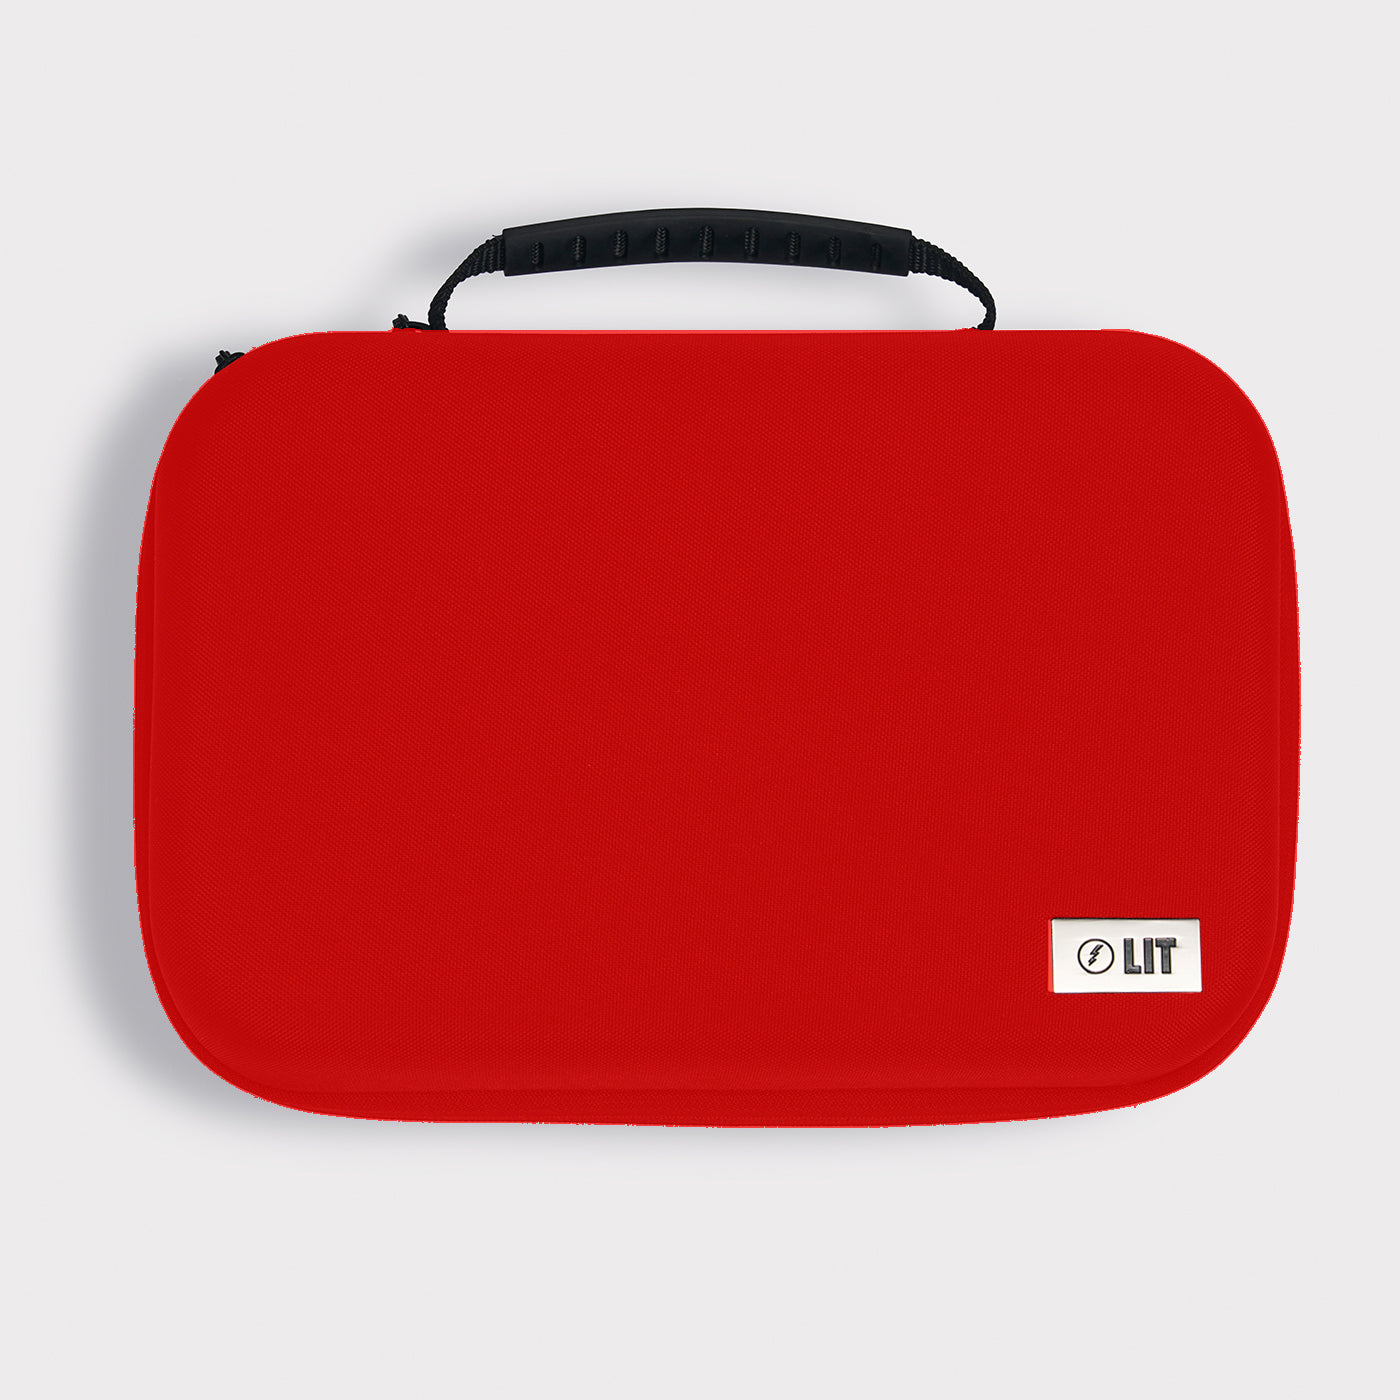 Carrying case for LIT Axis smart resistance bands